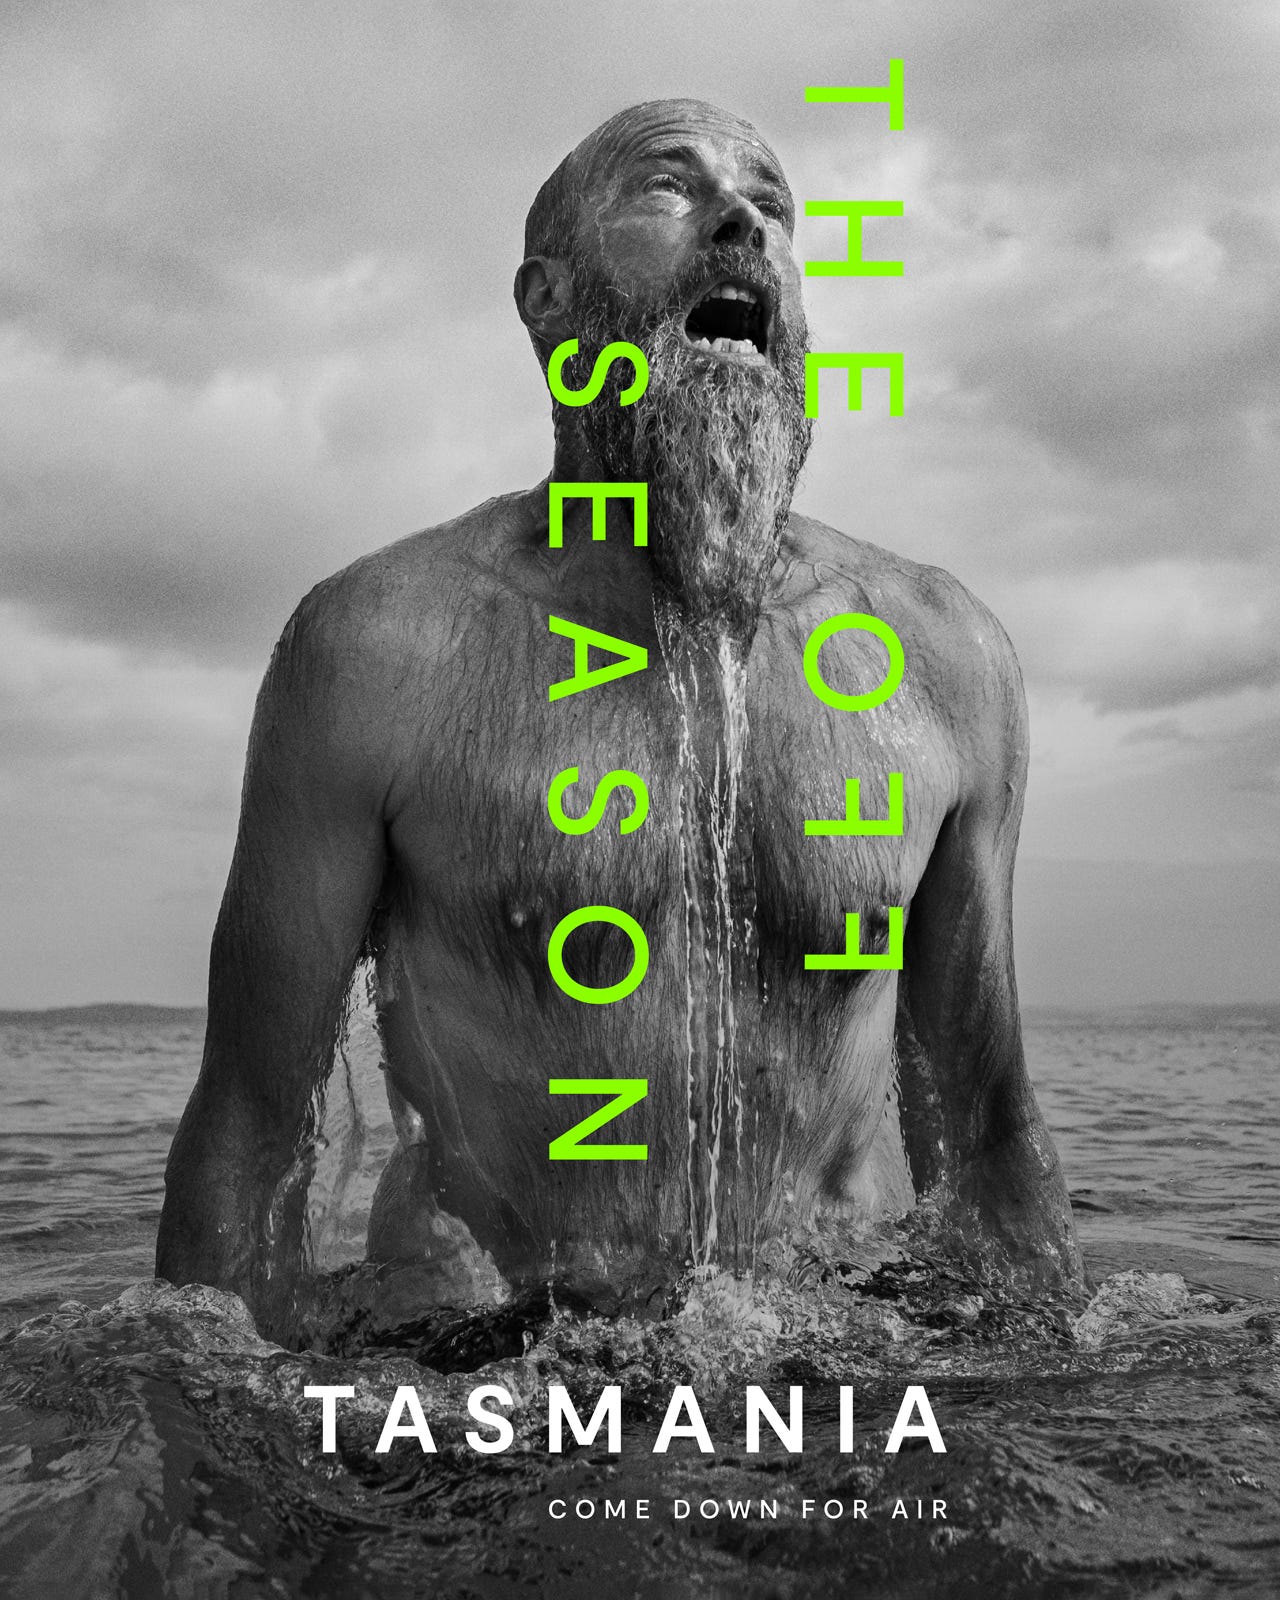 Tourism Tasmania on Twitter: "Tourism Tasmania's Off Season winter  marketing campaign returns in 2022. The campaign encourages visitors to  find inspiration in Tasmania's wild places, revel in our festivals and  sample our